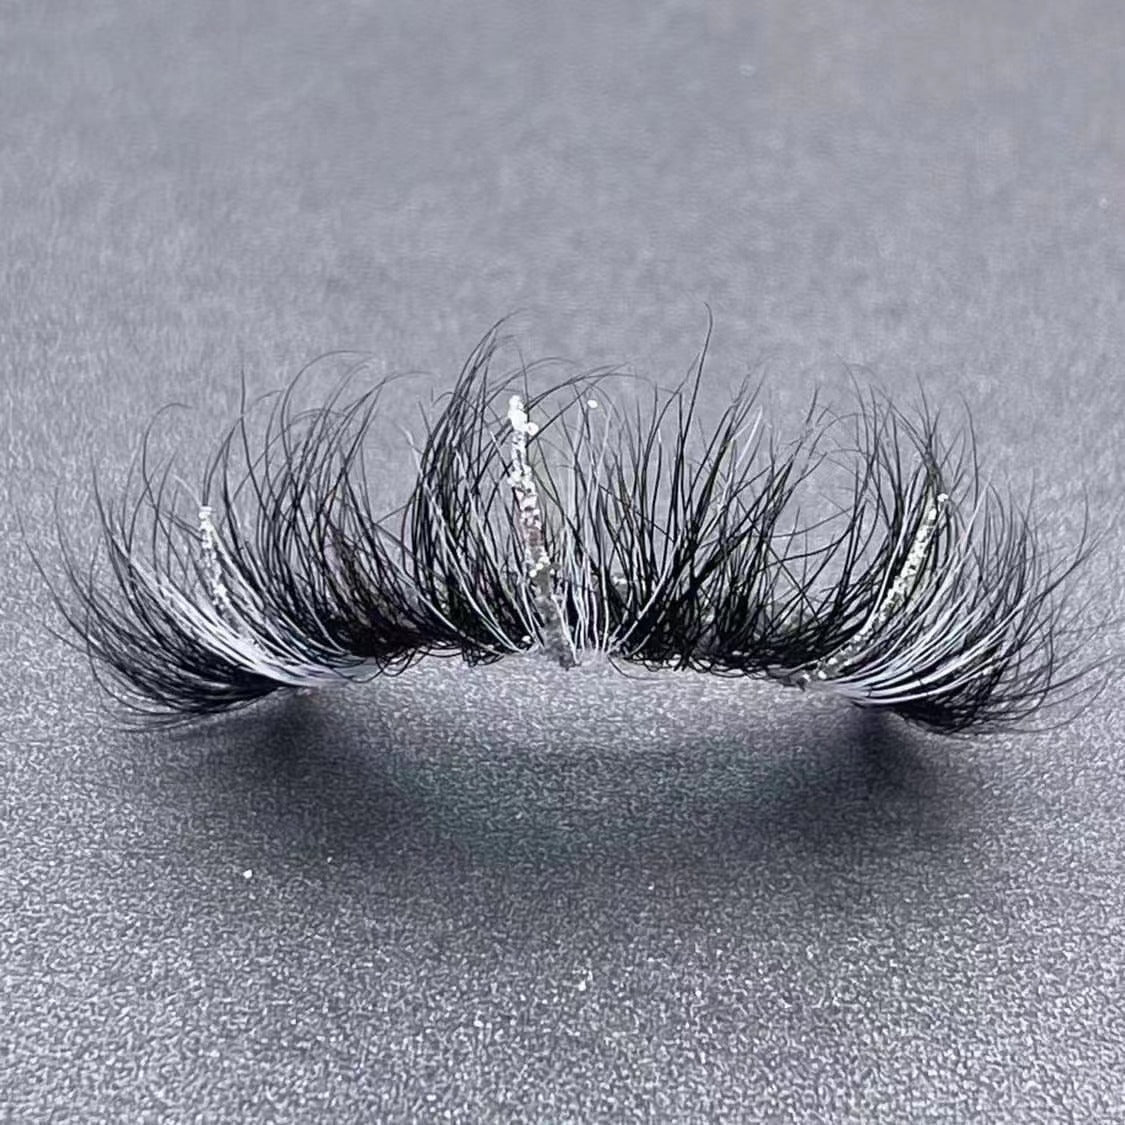 2Dadoll Dope White 3 Toned Glitter (25MM) Colored Lashes